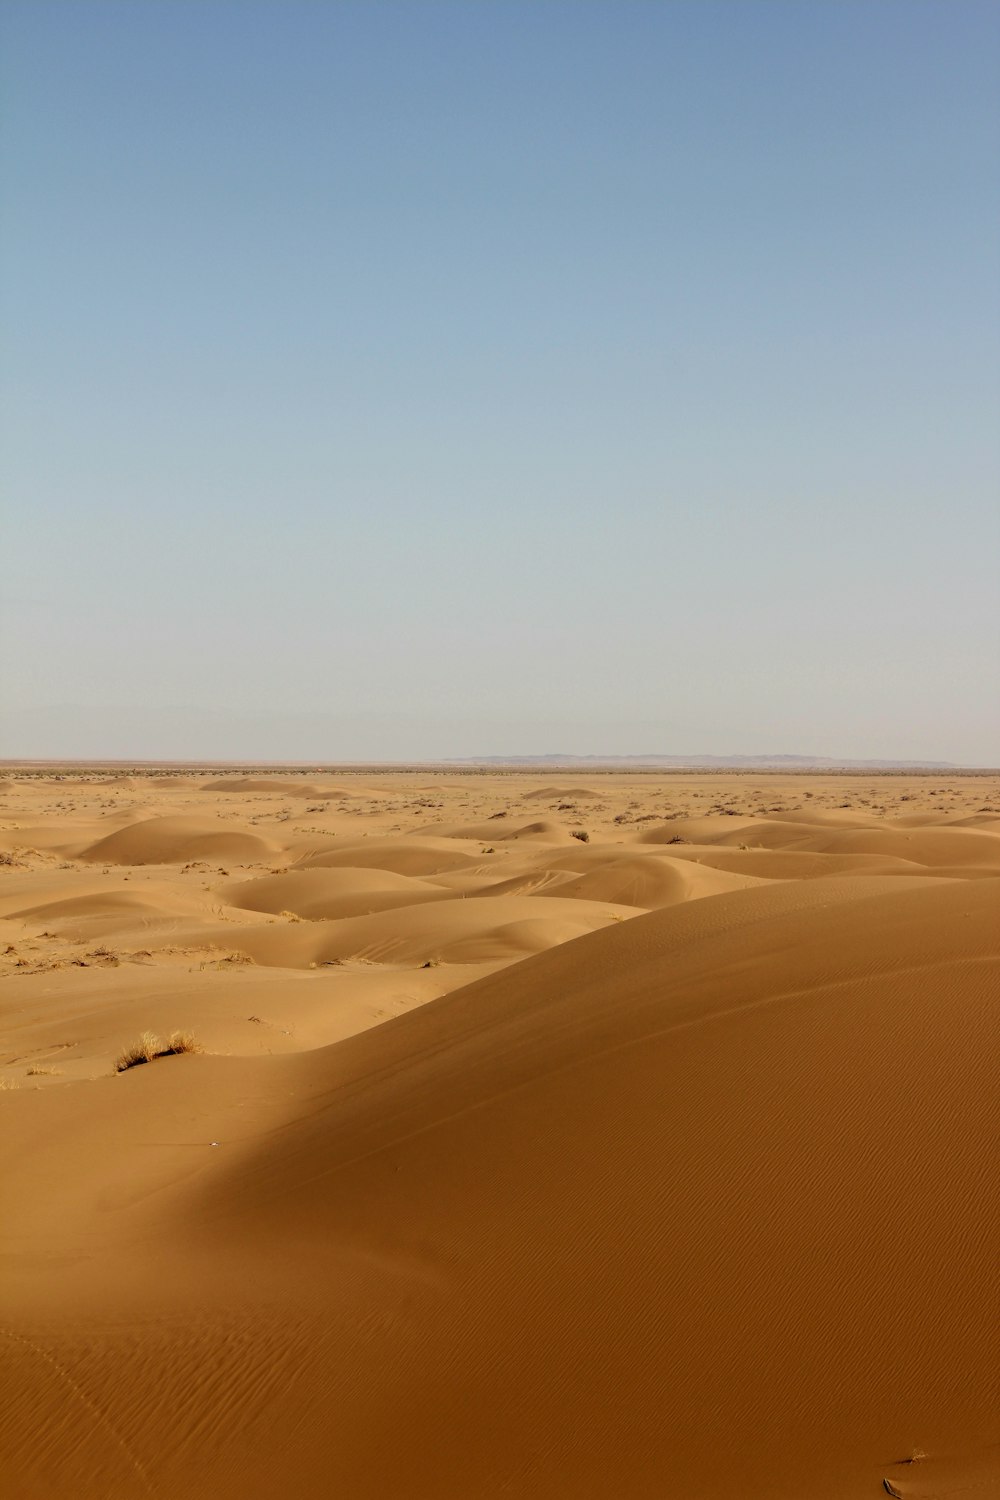 a large sandy area with a few trees in the distance